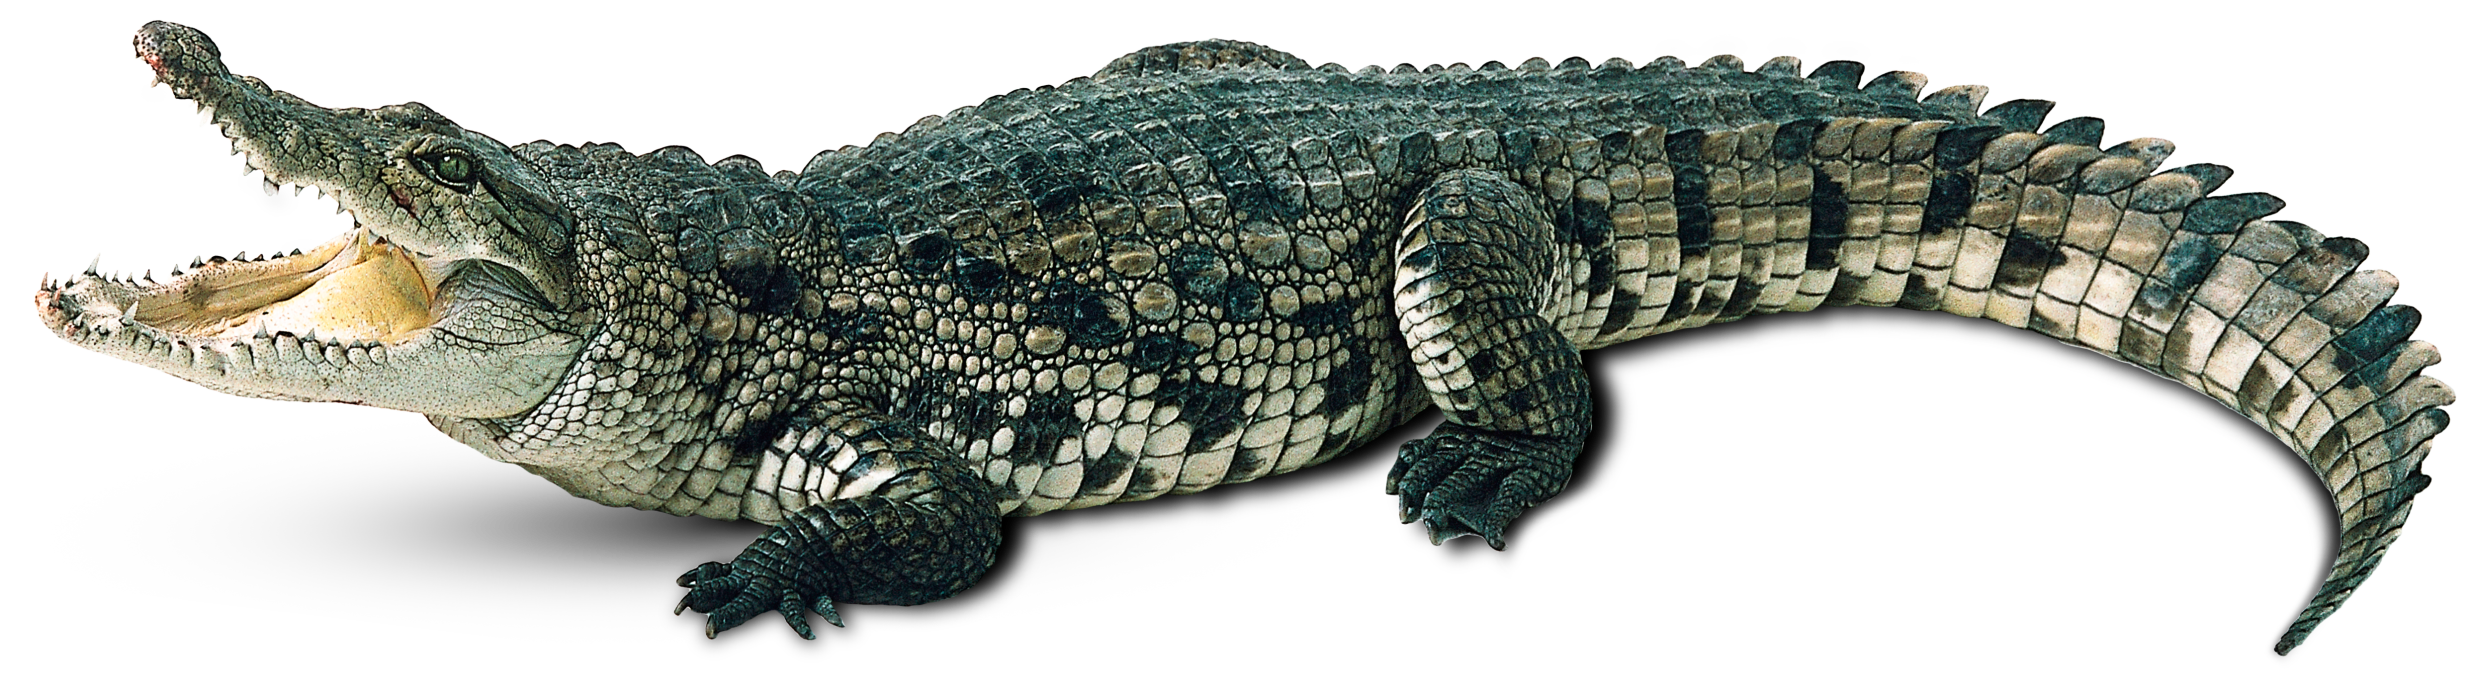 PNG STOCK: Crocodile by MAKY-